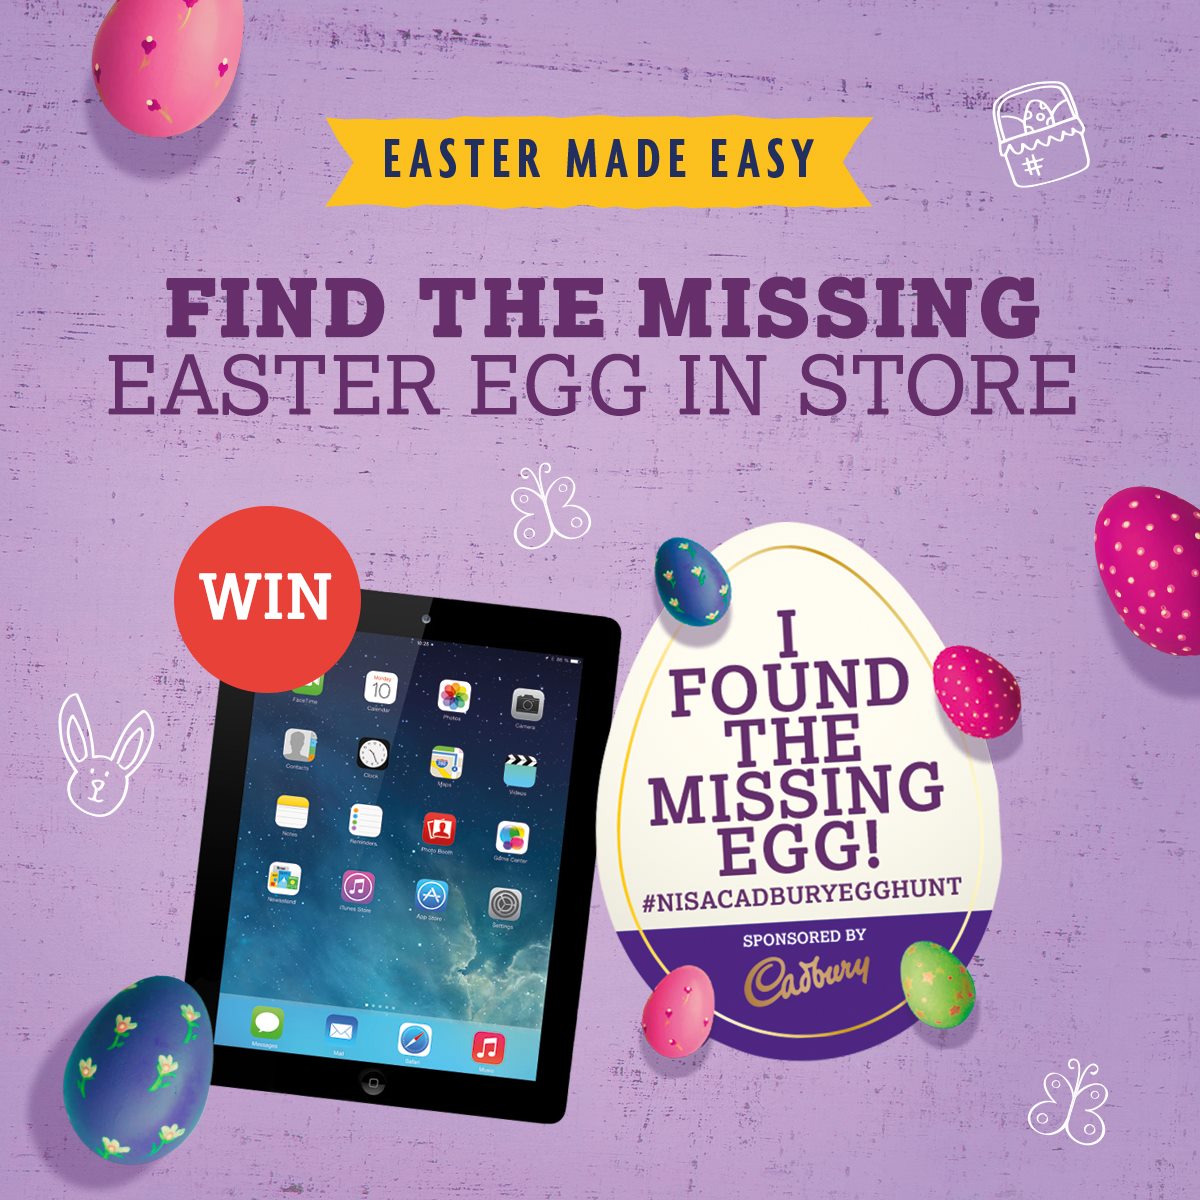 An image from Cadbury's Easter Egg Hunt campaign